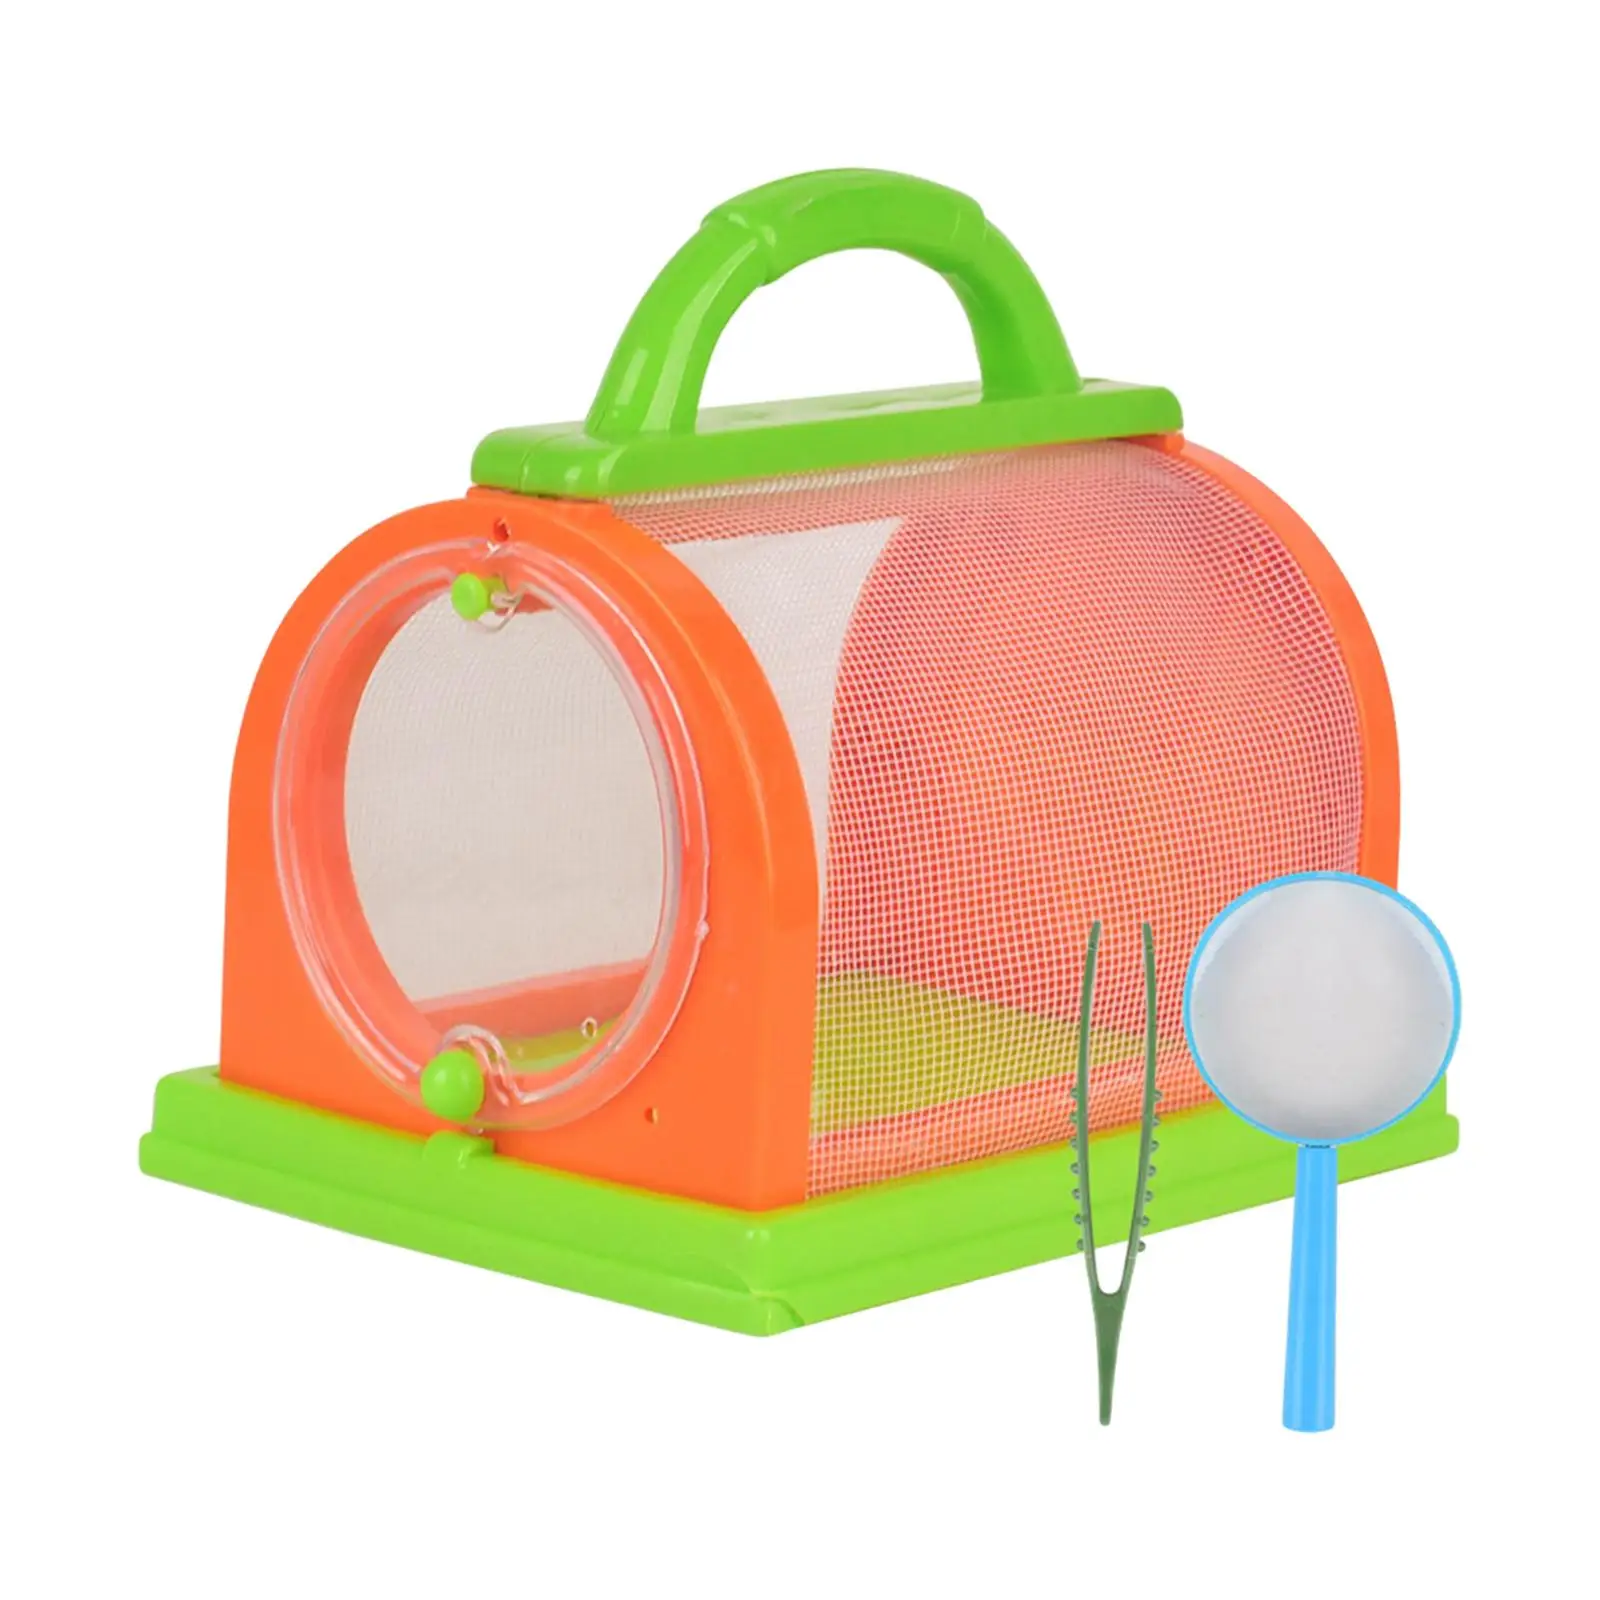 Butterfly Observation Box with Magnifying Glass Cage for Outdoor Activities